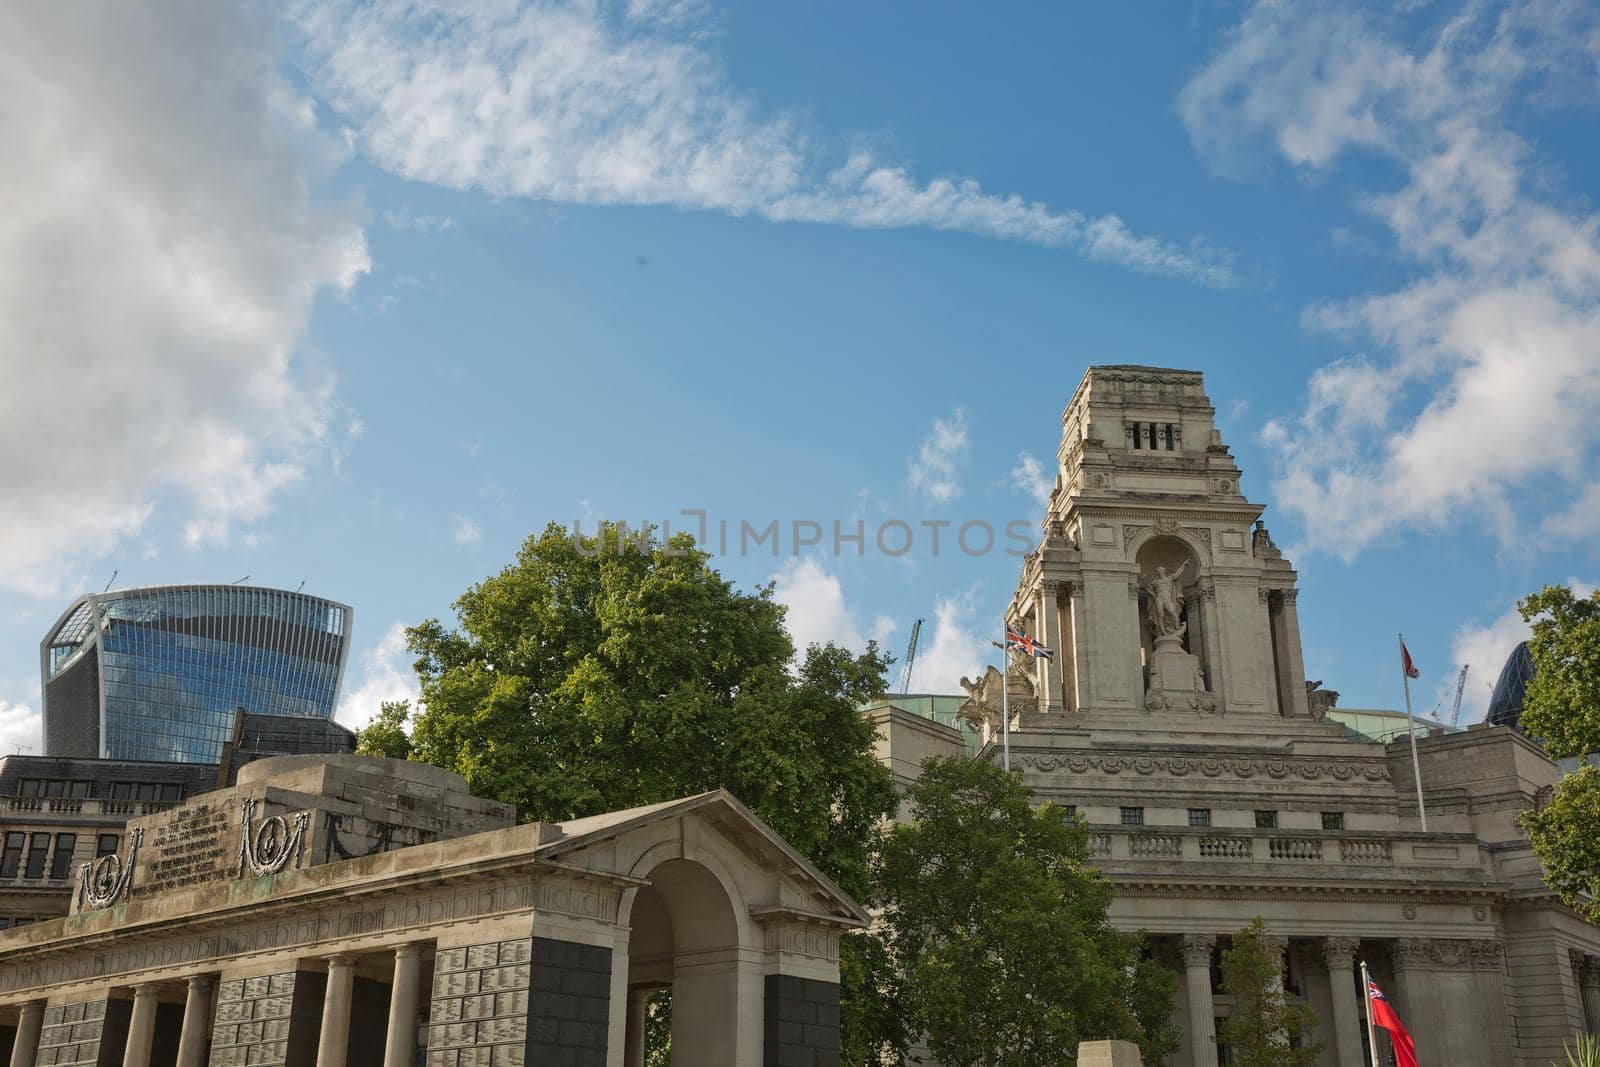 LONDON, UK - SEPTEMBER 08, 2017: View of architecture of the city of London in UK alongside the riverbank of River Thames.